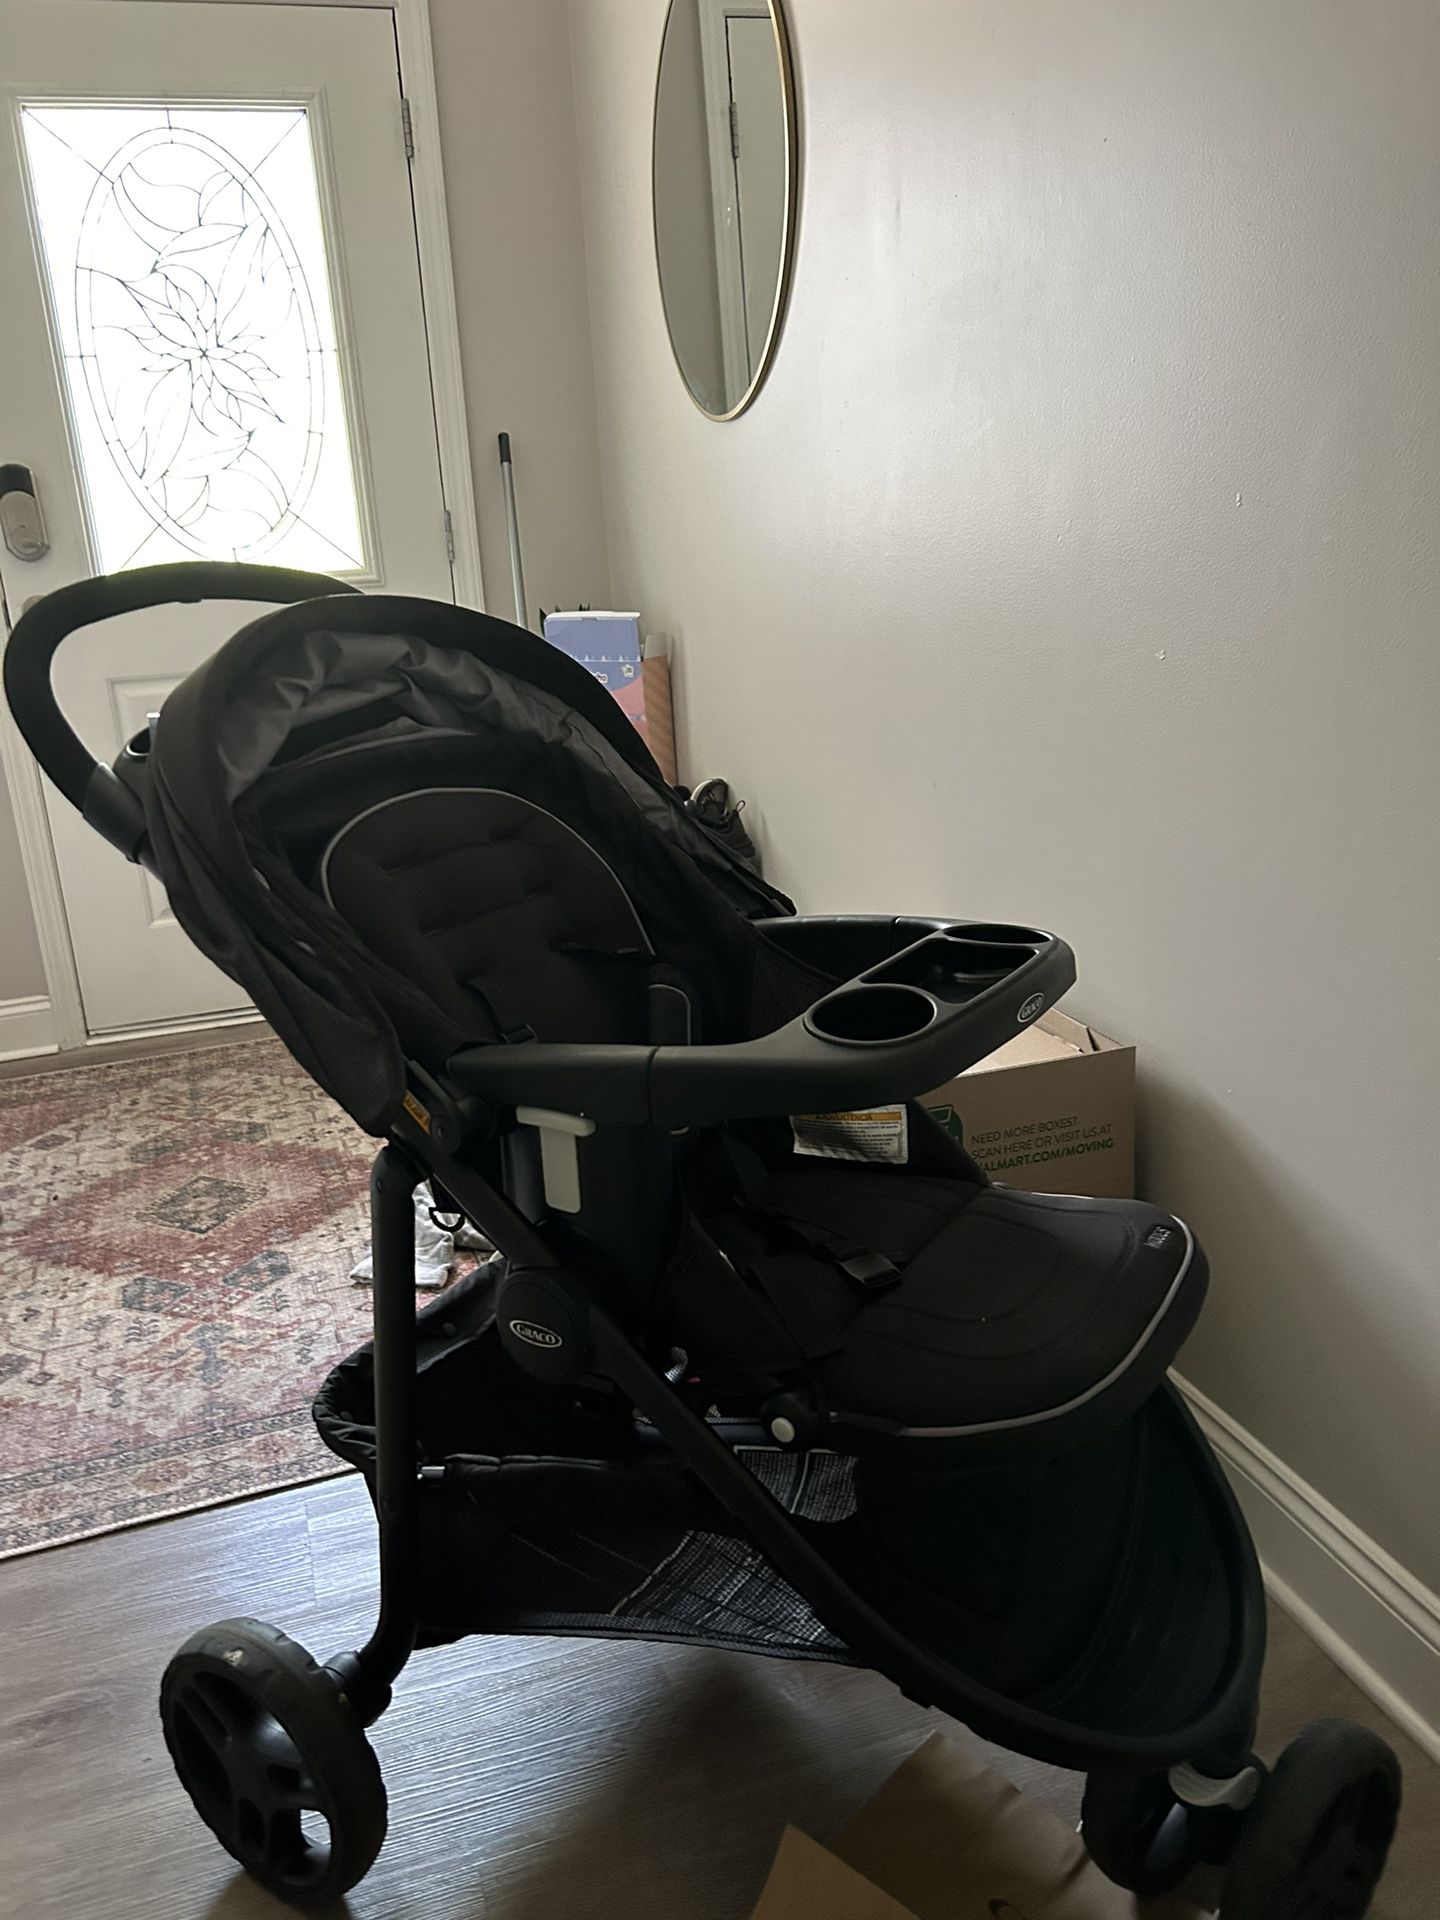 NEEDS TO GO graco travel system 